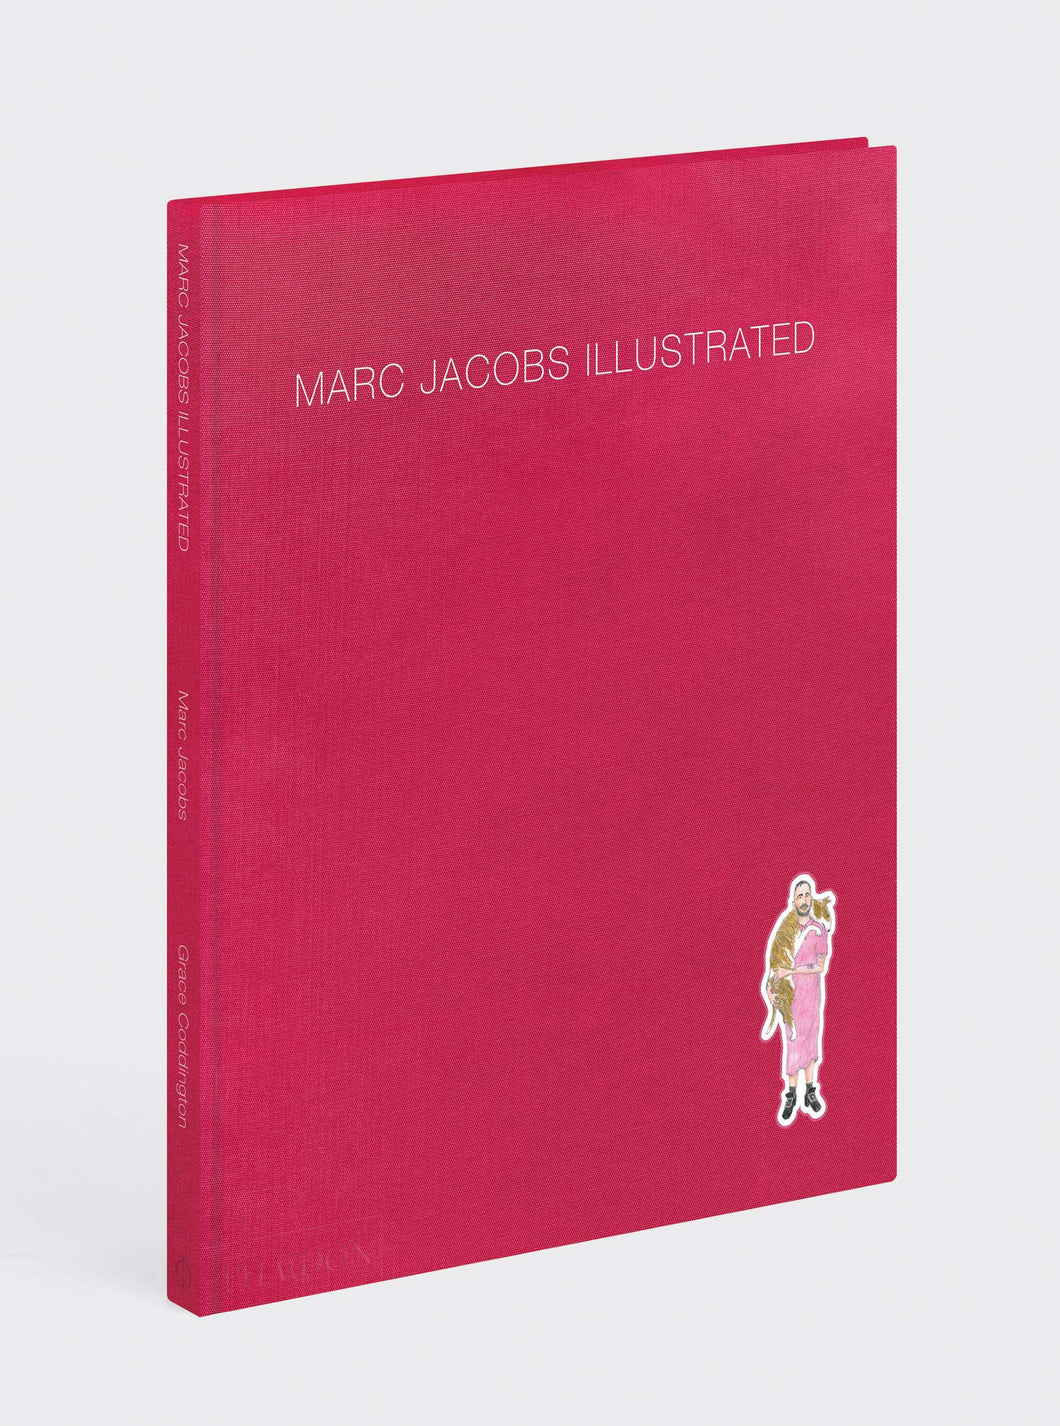 MARC JACOBS ILLUSTRATED